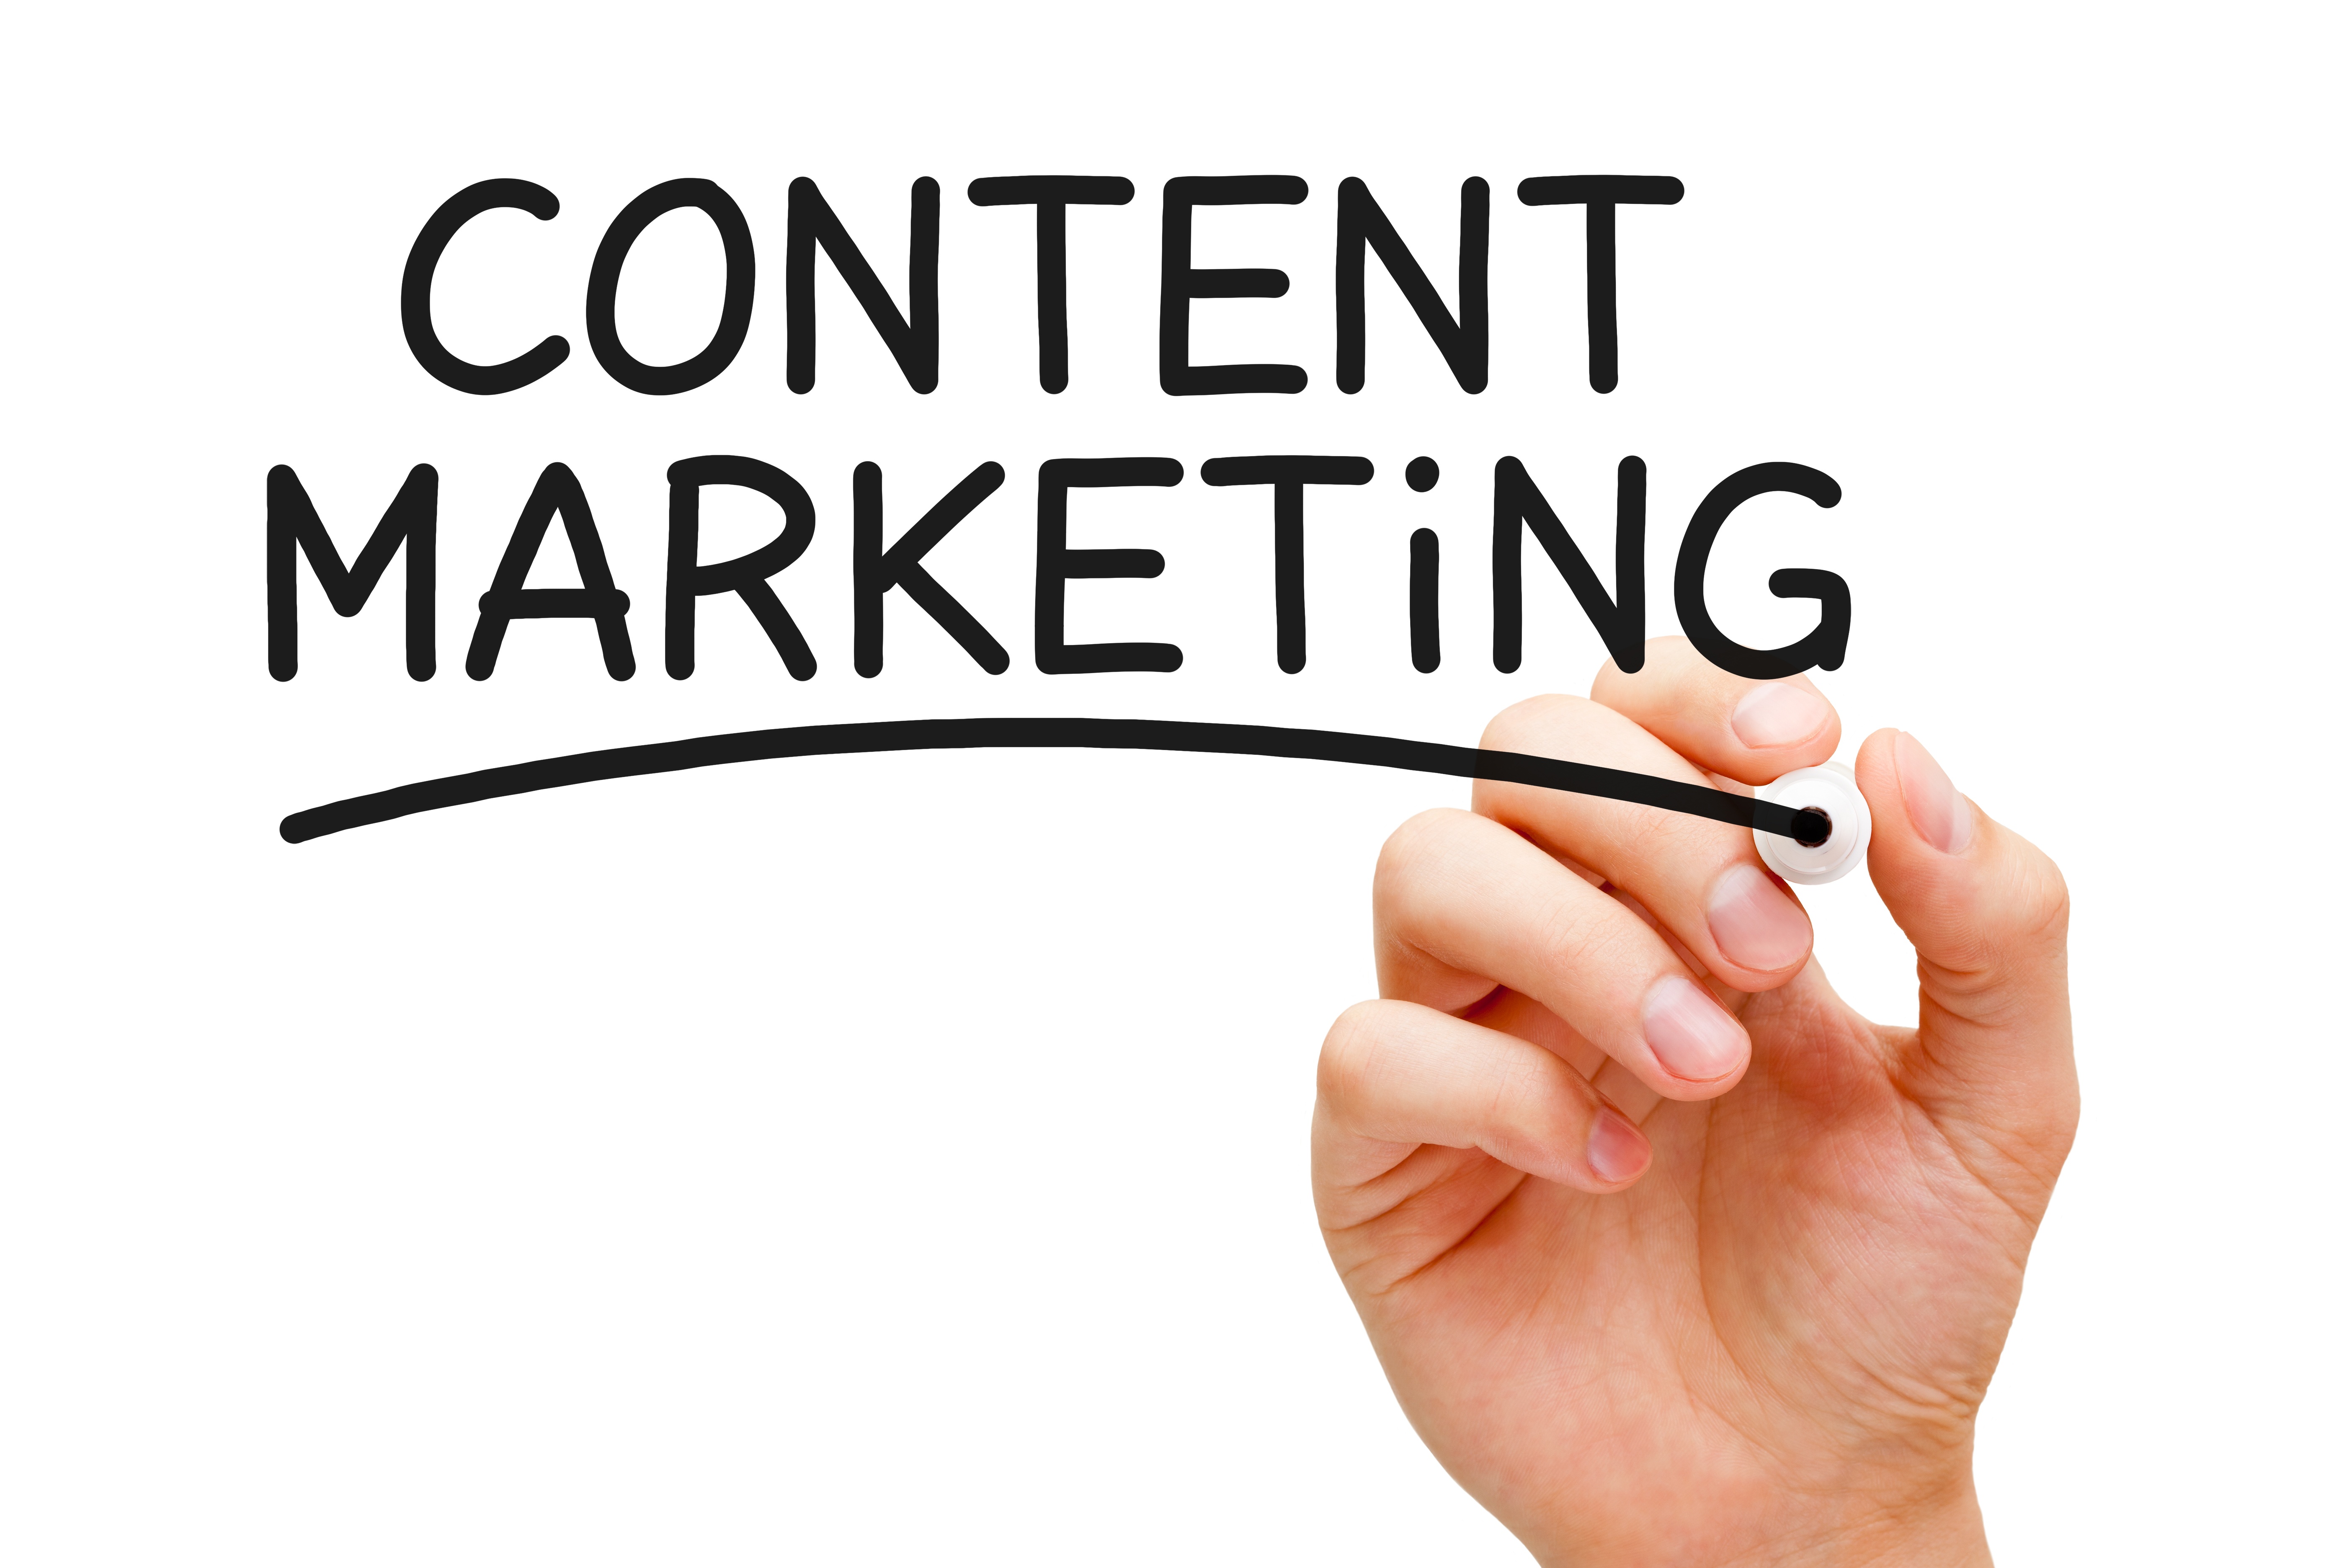 PR: Ahead of its (Content Marketing) Time